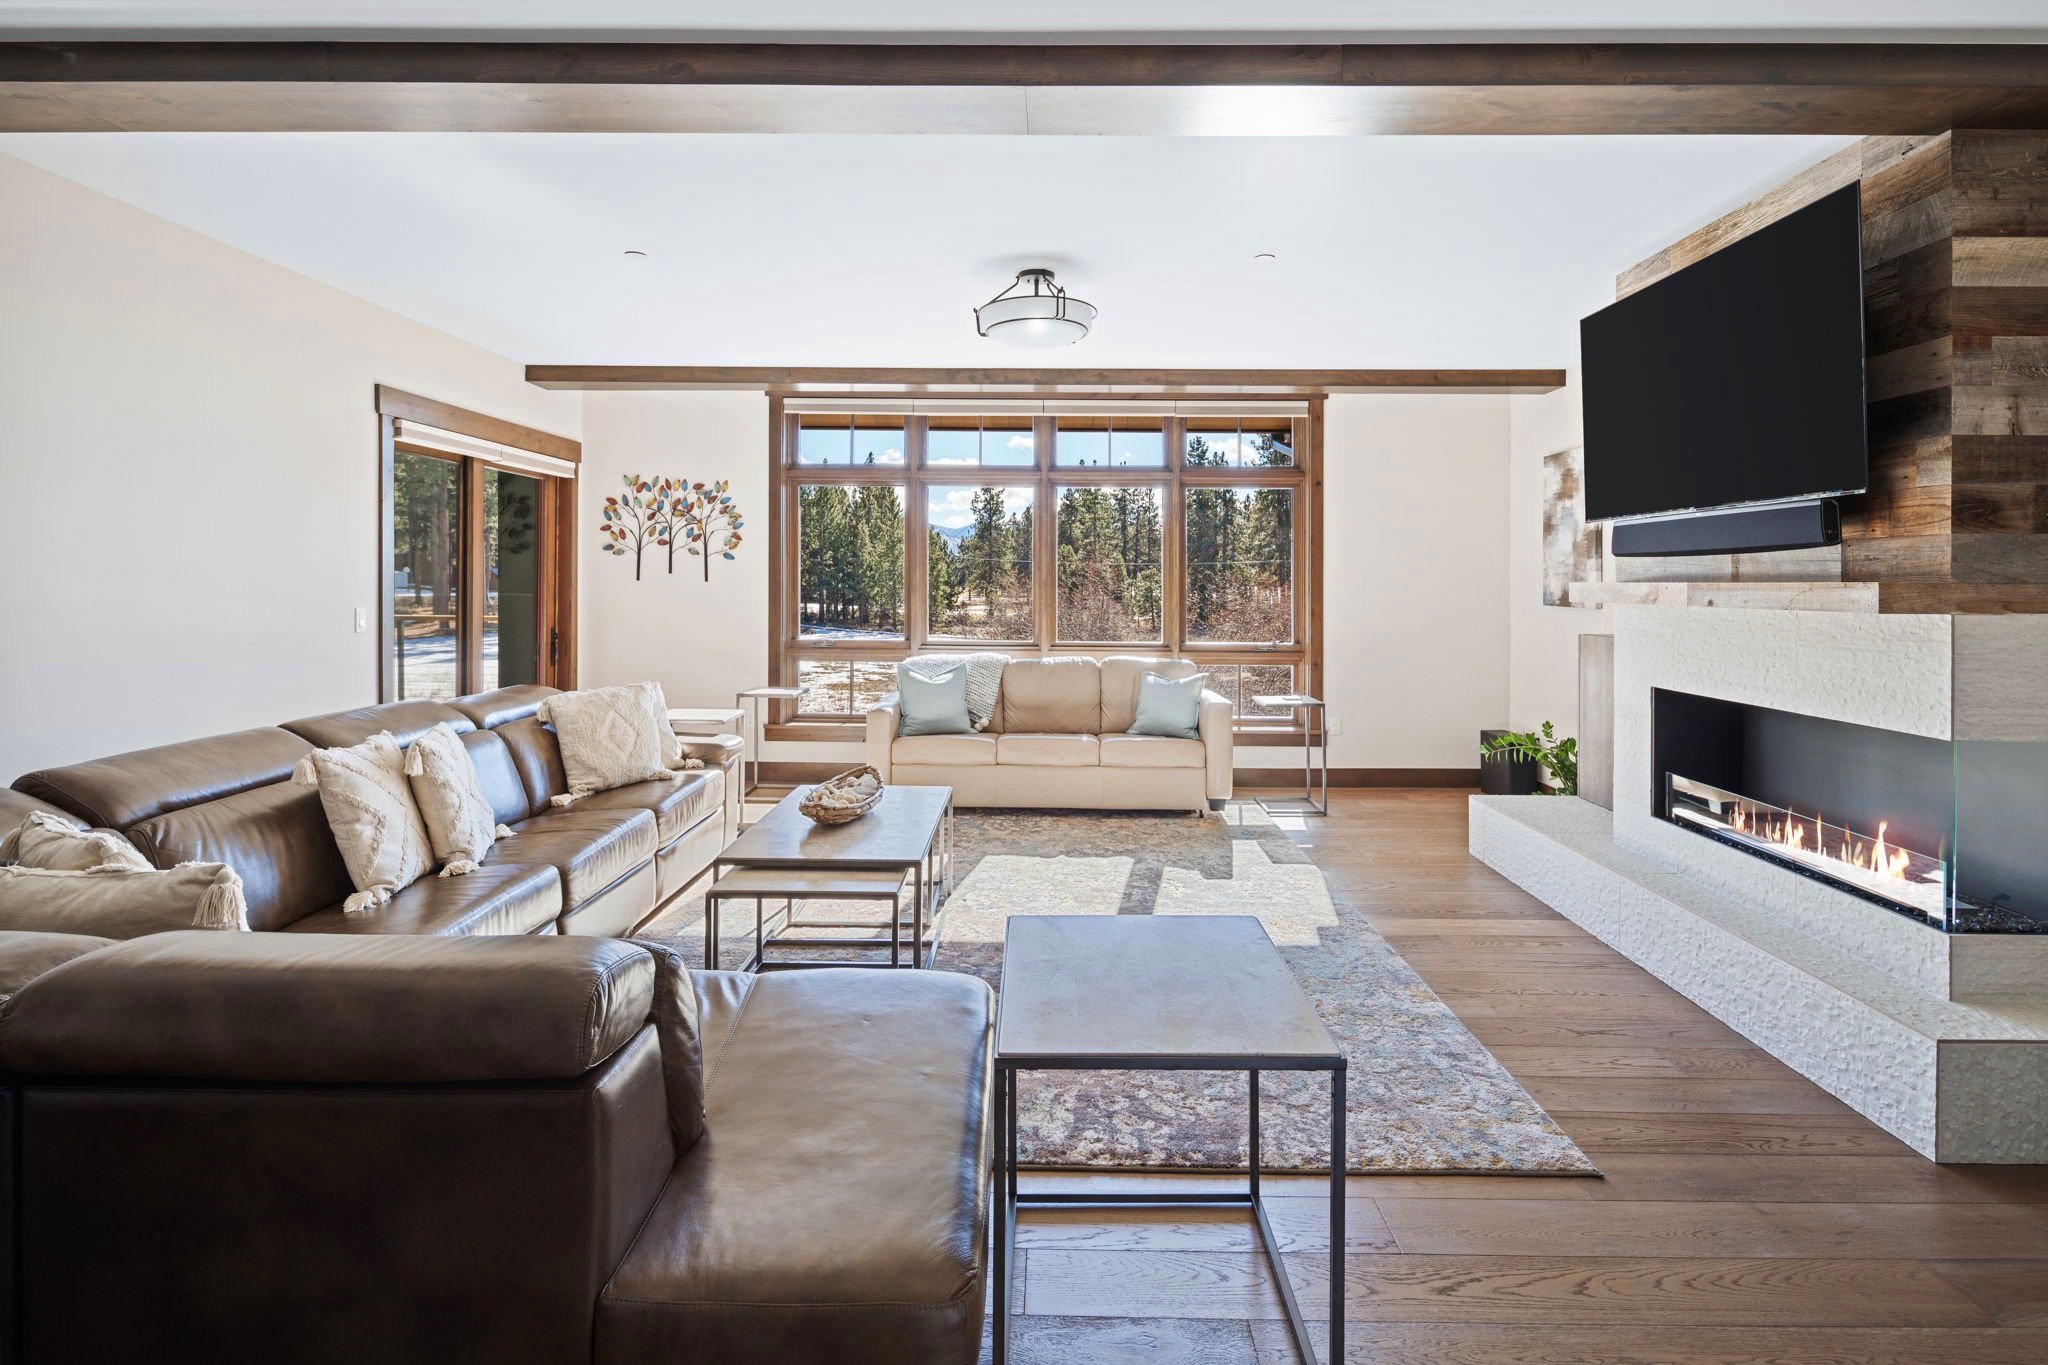 A cozy living room with a fireplace crackling warmly and a flat-screen TV. Glass doors open up to the Tahoe landscape. 